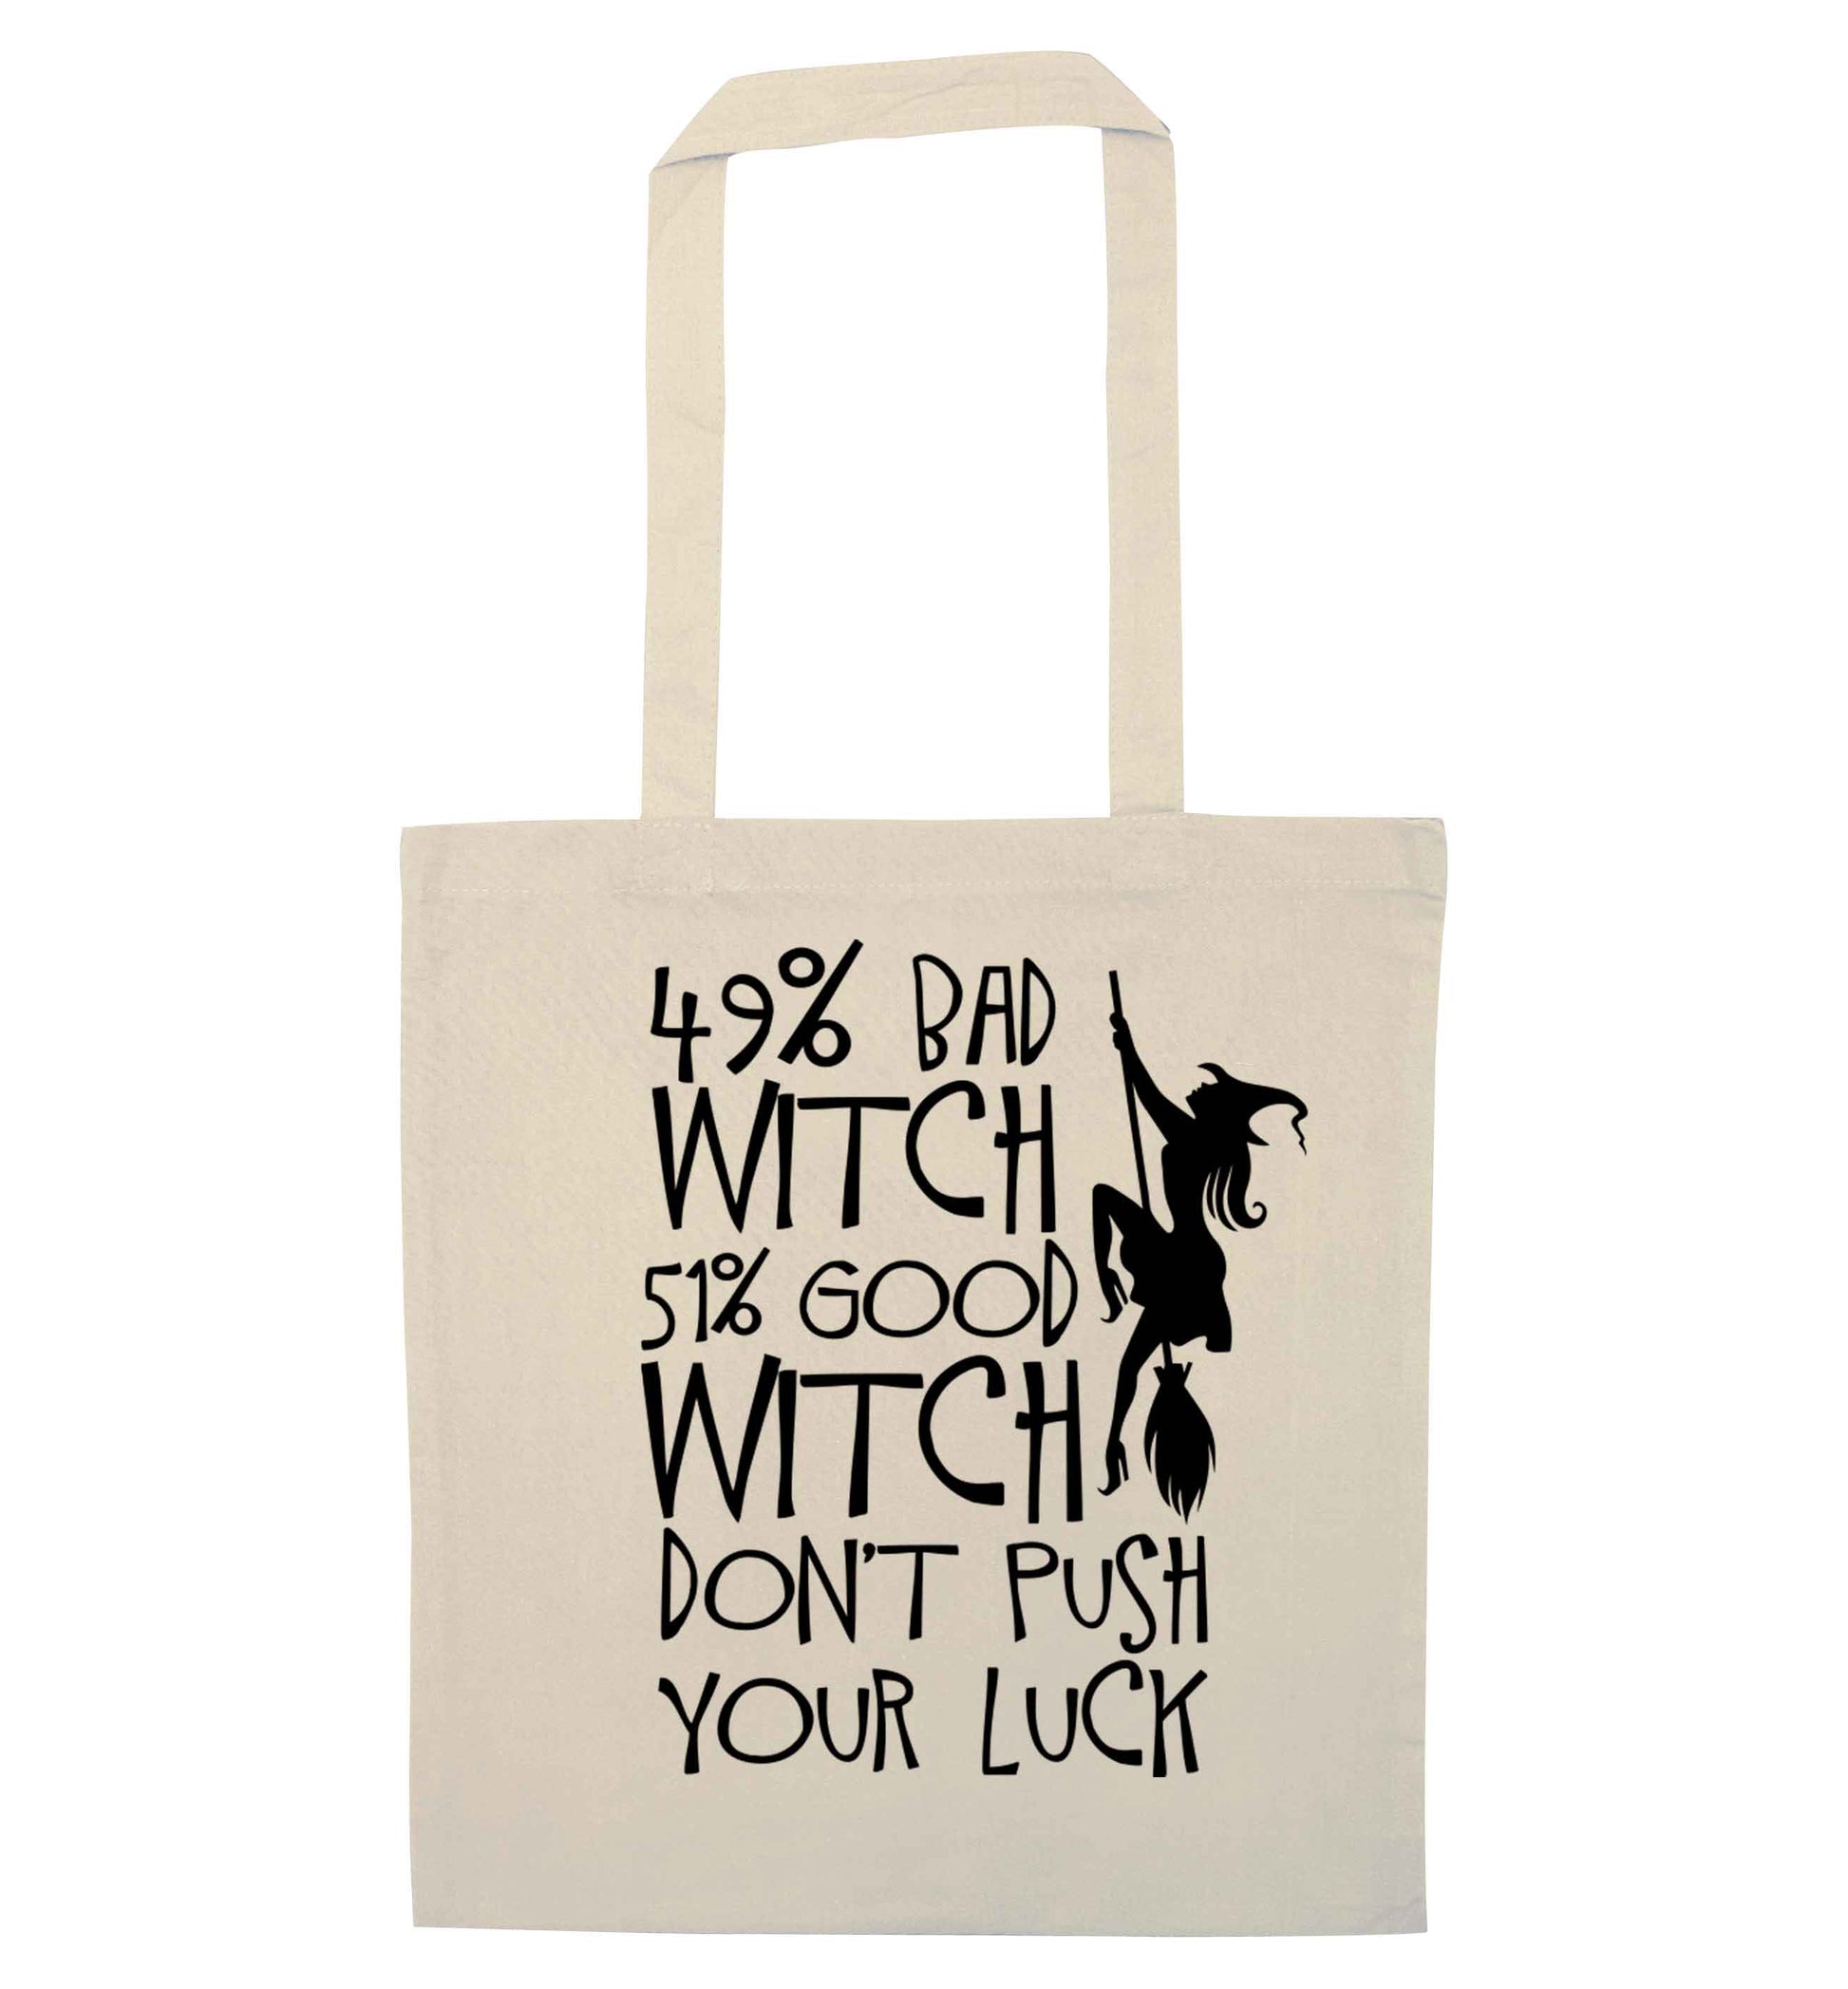 49% bad witch 51% good witch don't push your luck natural tote bag